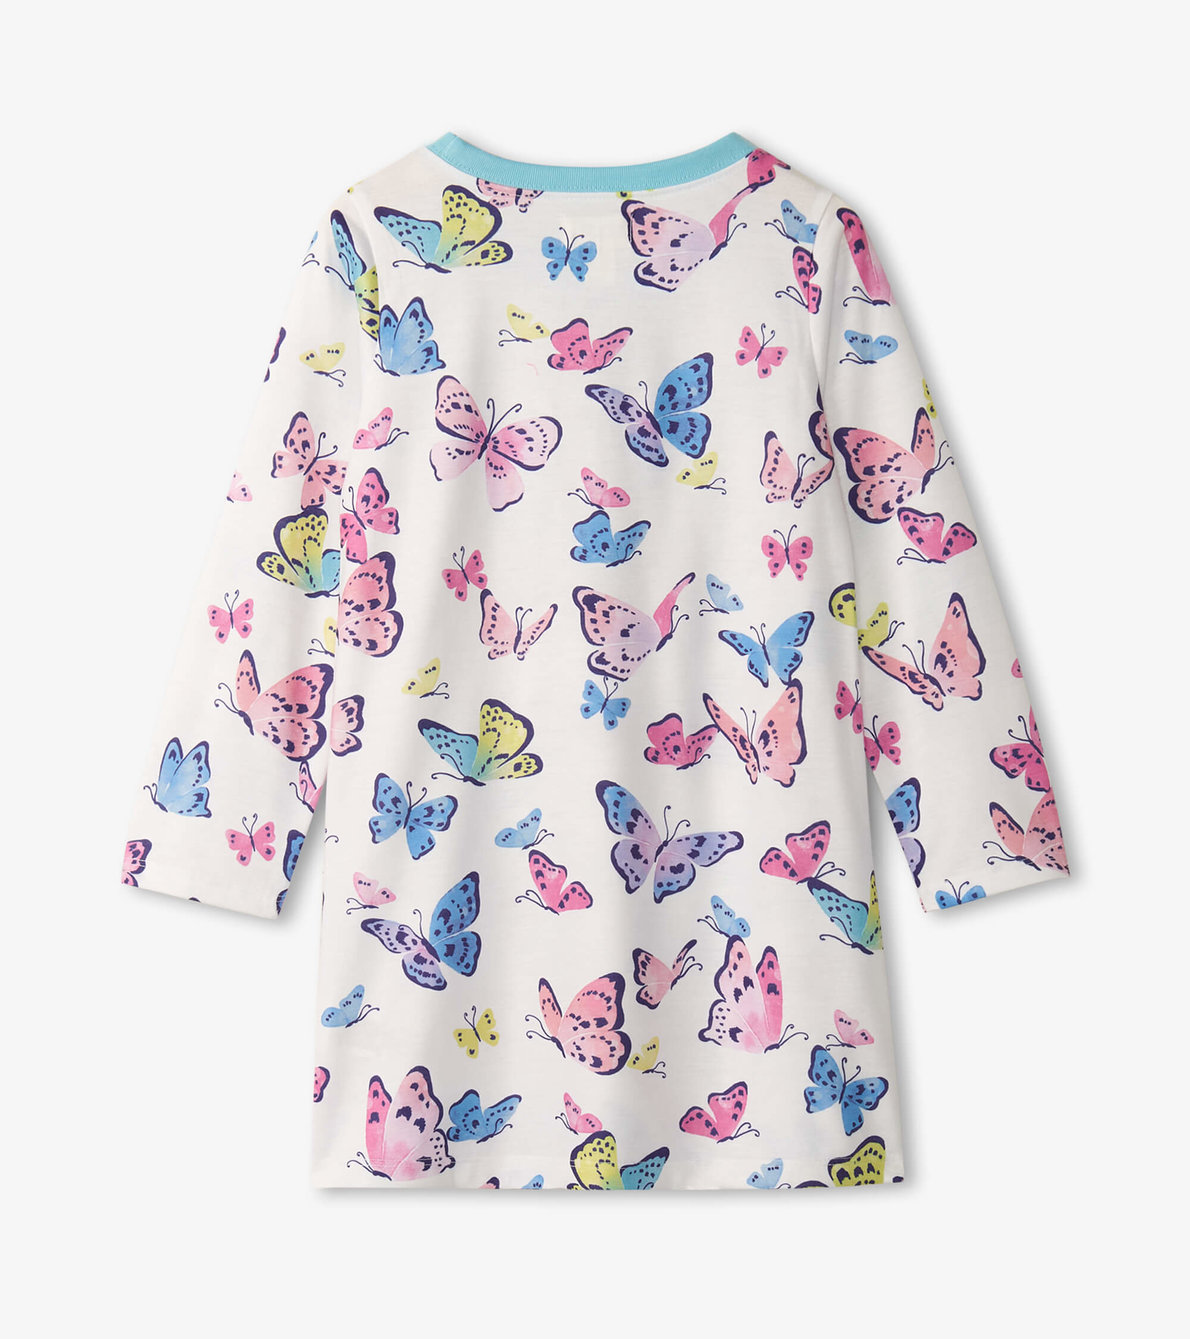 View larger image of Girls Big Butterflies Long Sleeve Nightgown